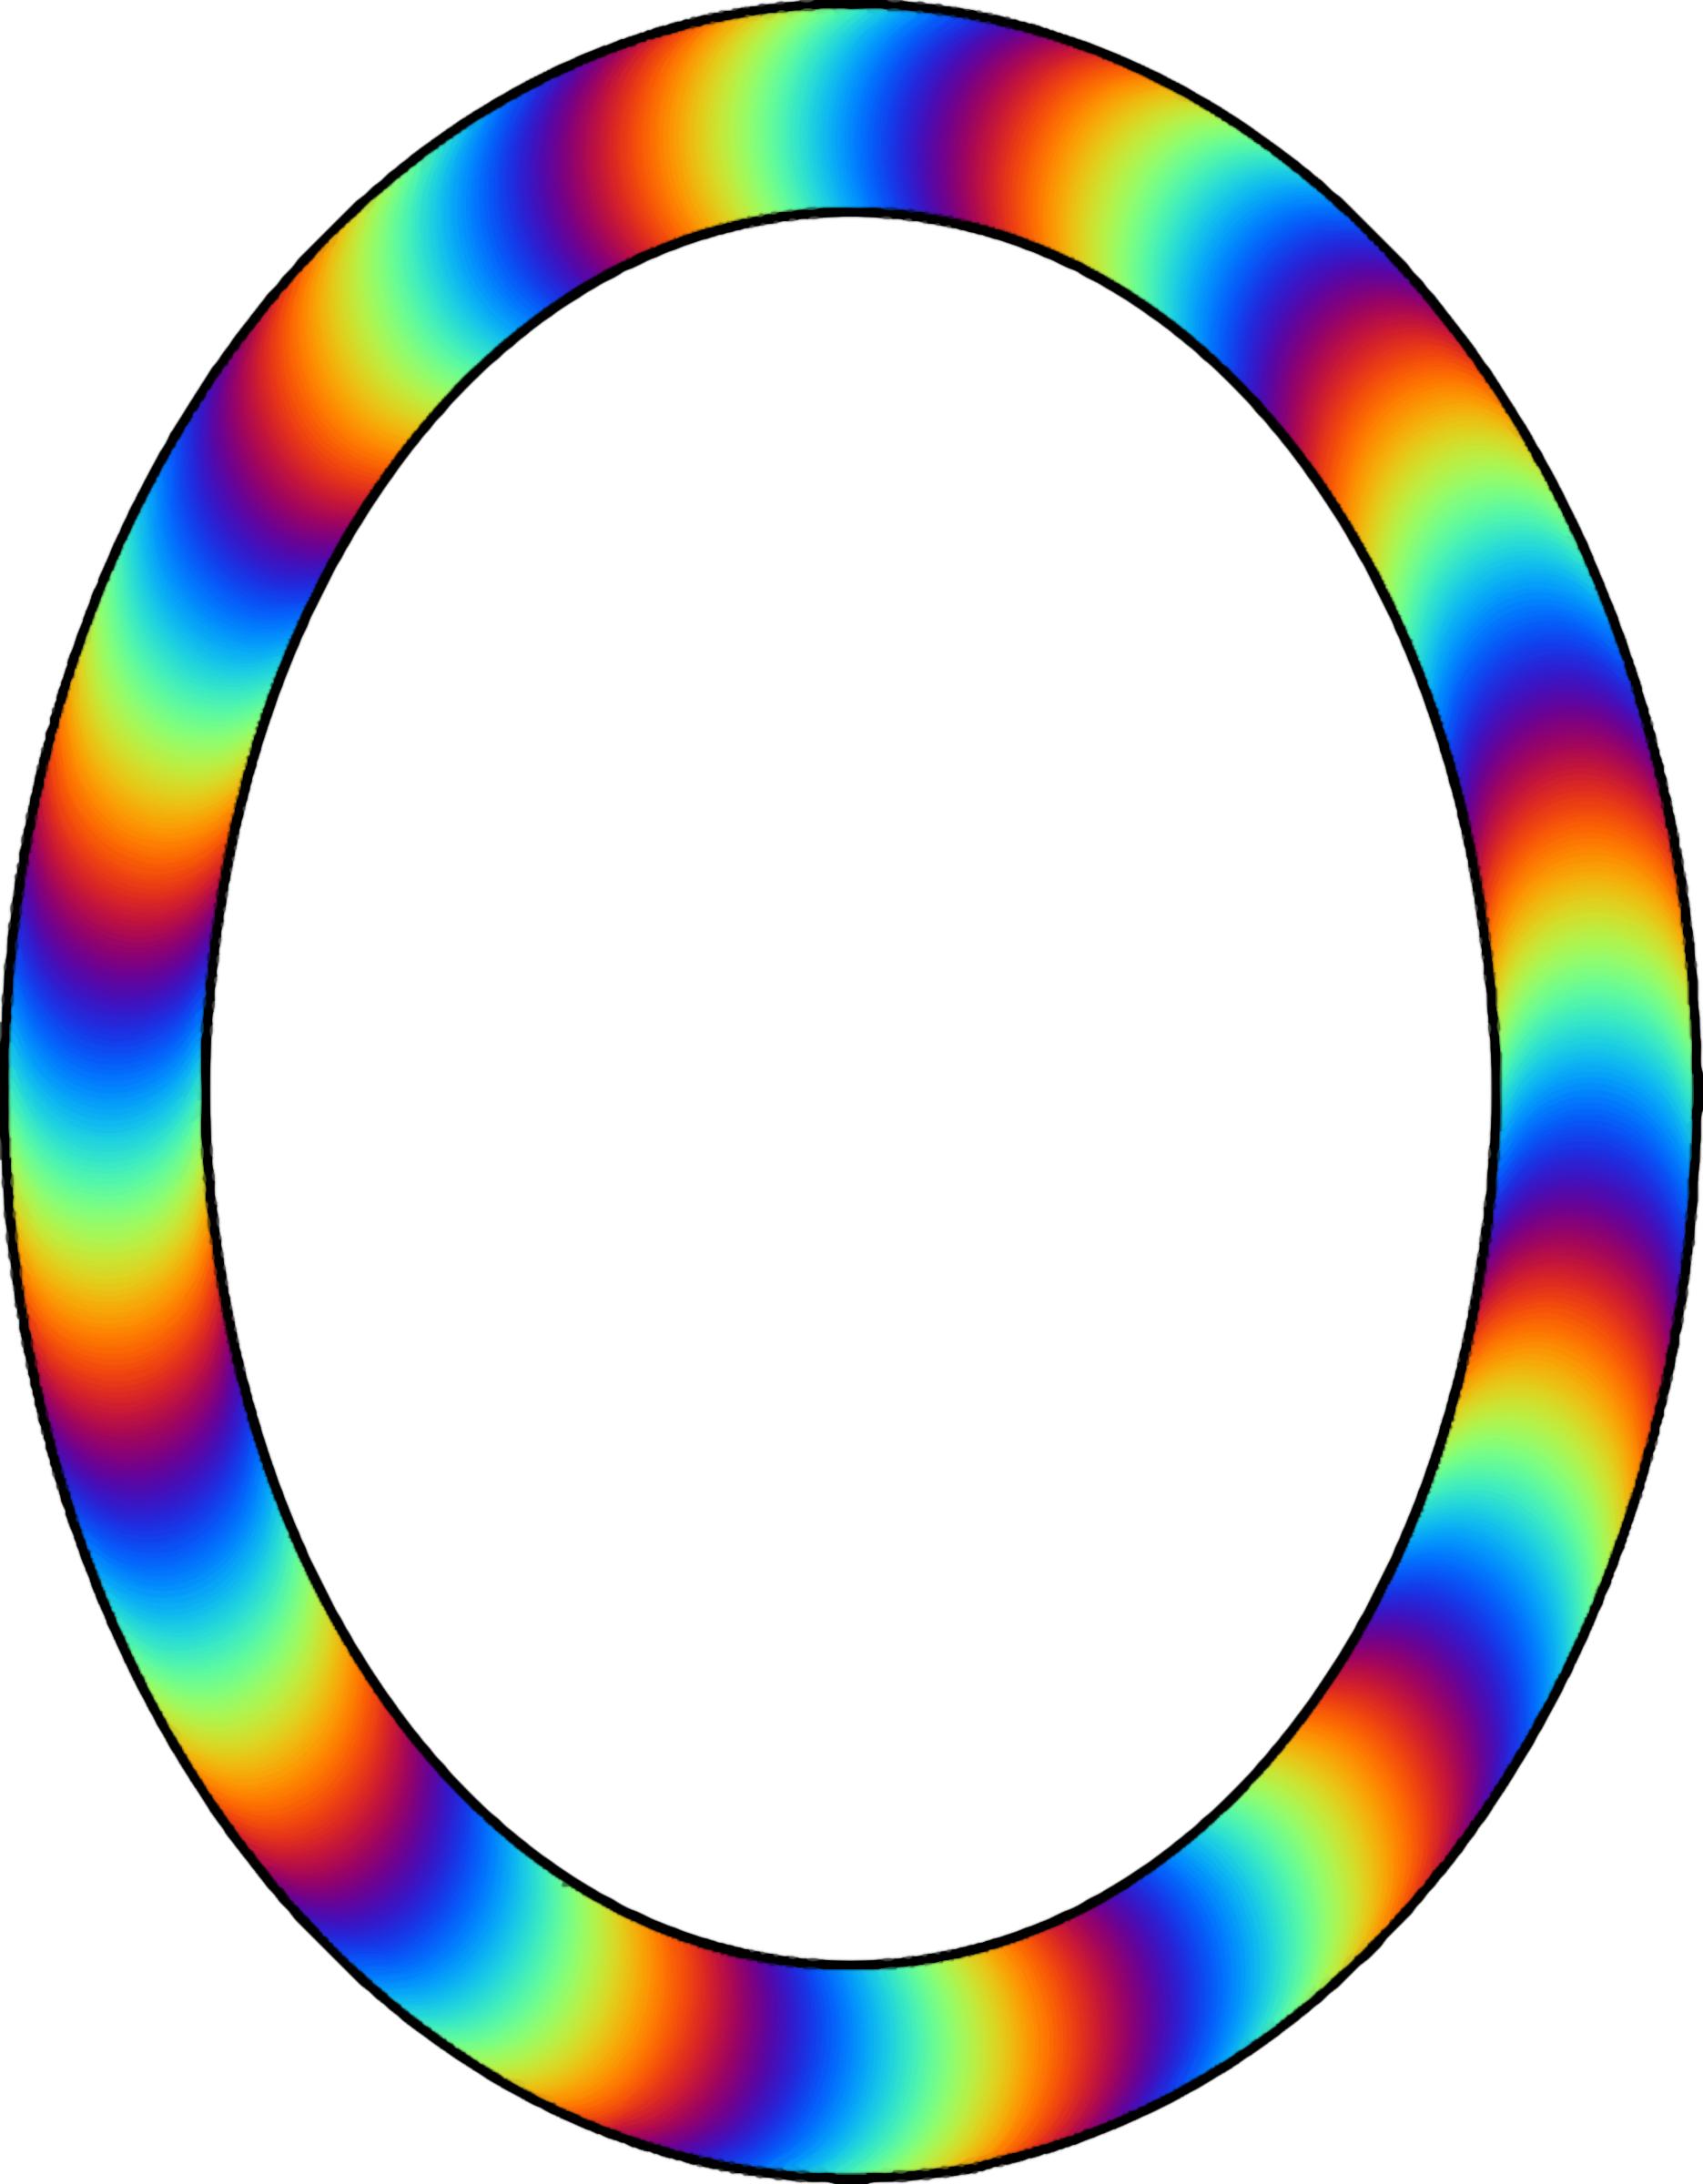 Colourful frame png